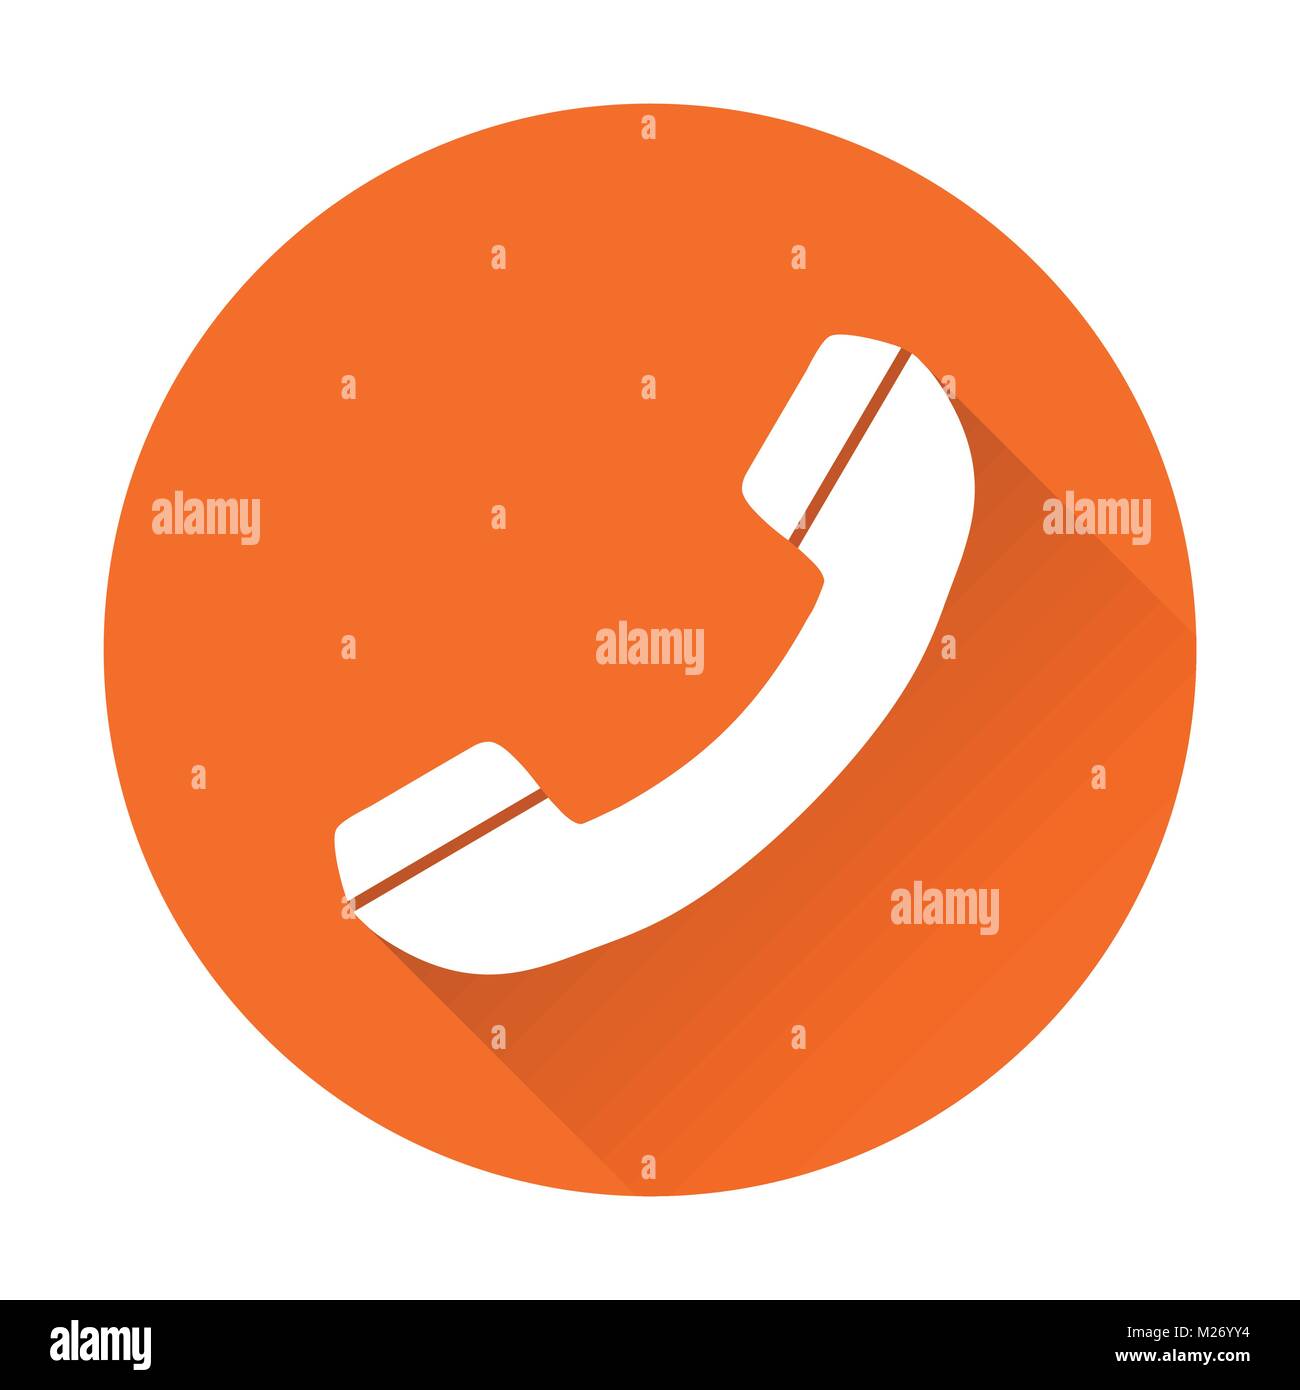 Phone icon vector, contact, support service sign isolated on round orange background with long shadow. Telephone, communication icon in flat style. Stock Vector